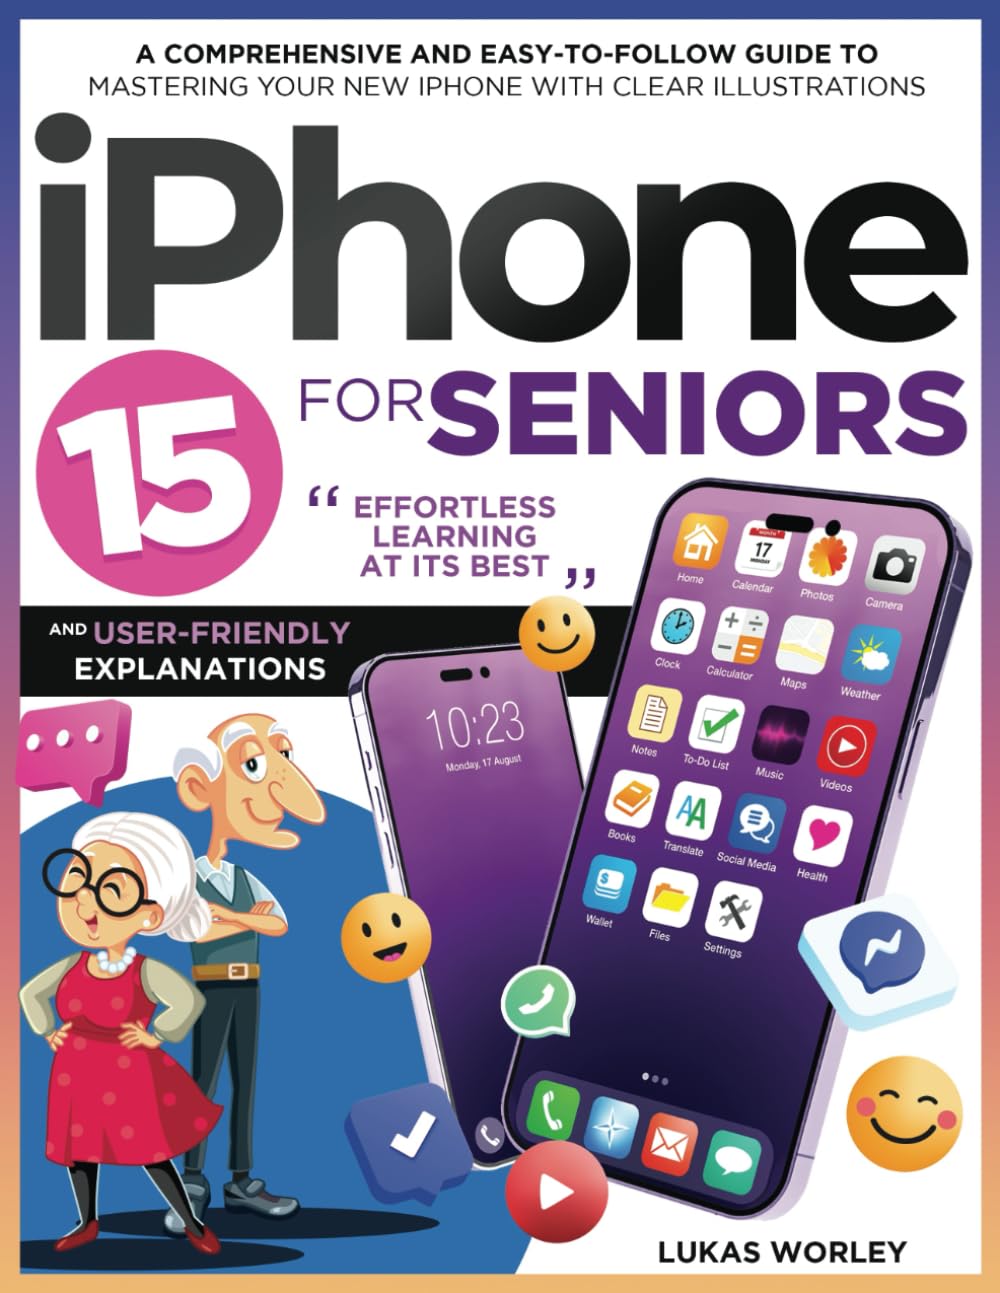 iPhone 15 for Seniors: A Comprehensive and Easy-to-Follow Guide to Mastering Your New iPhone with Clear Illustrations and User-Friendly Explanations. Effortless Learning at Its Best